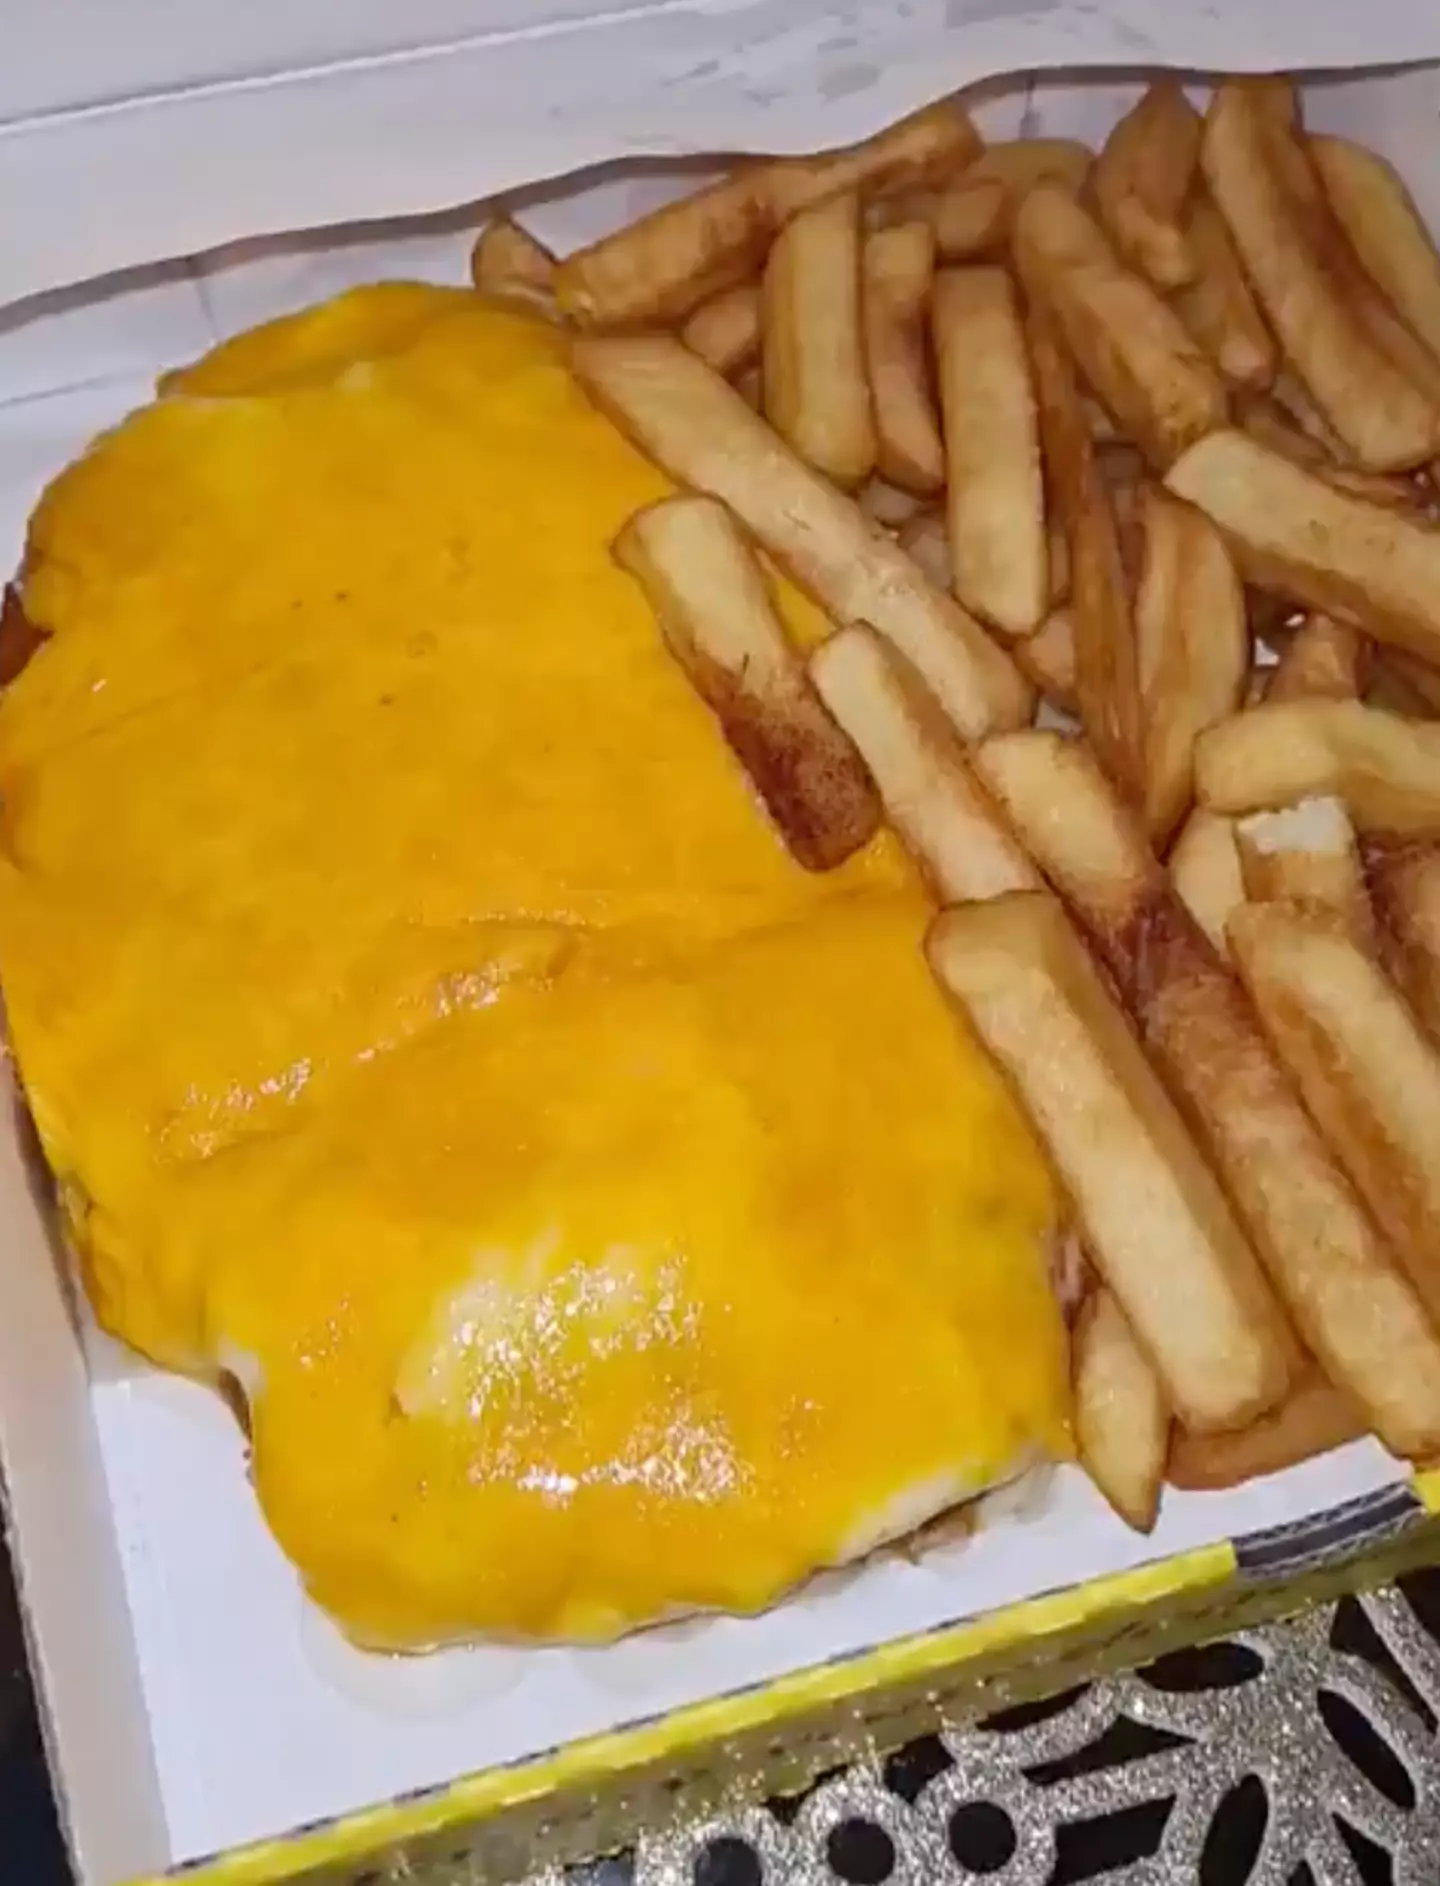 A teeside parmo also looks pretty heart-attack inducing.